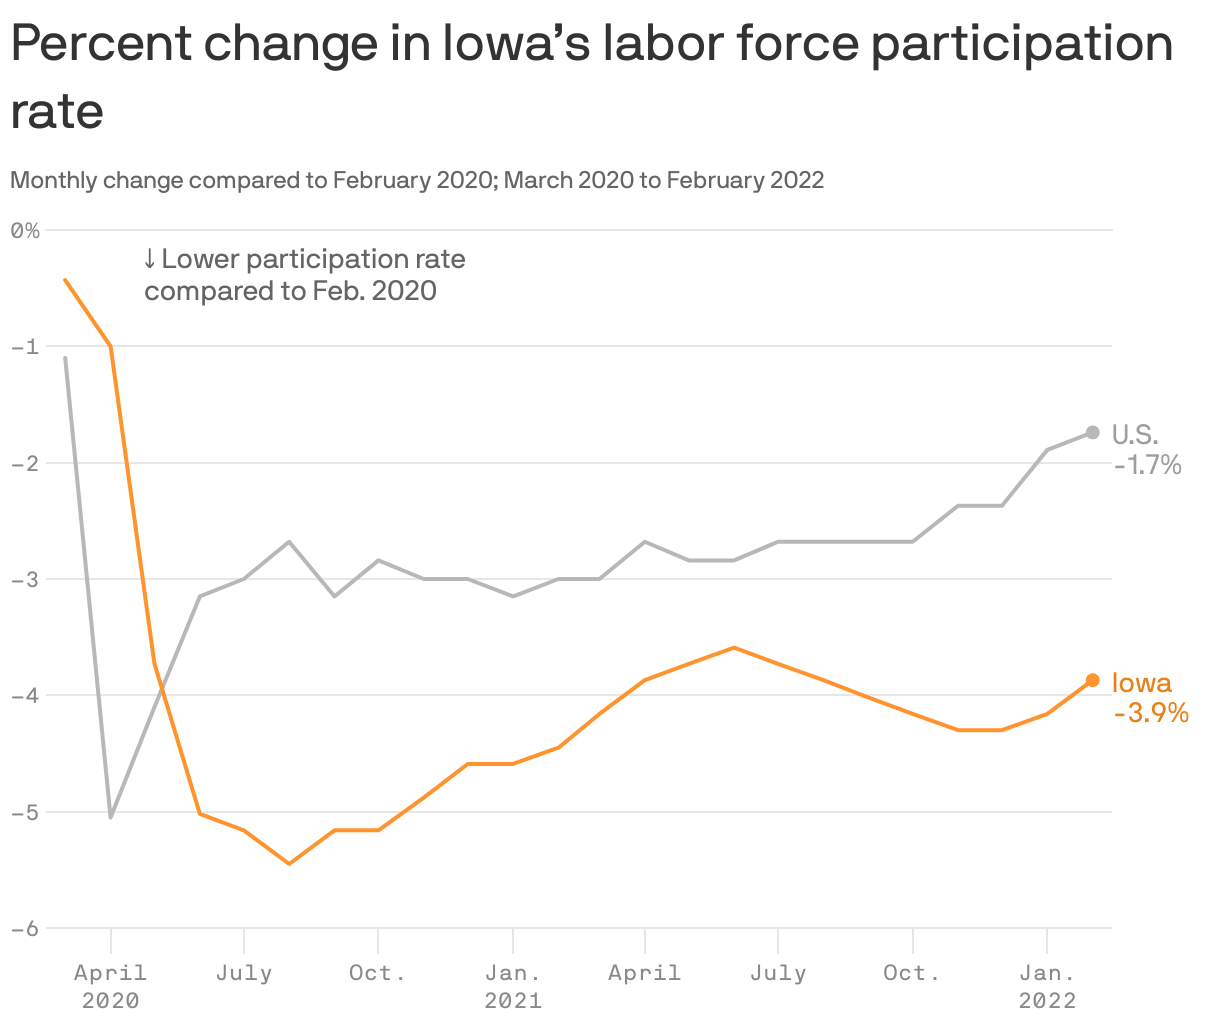 Percent change in Iowa’s labor force participation rate